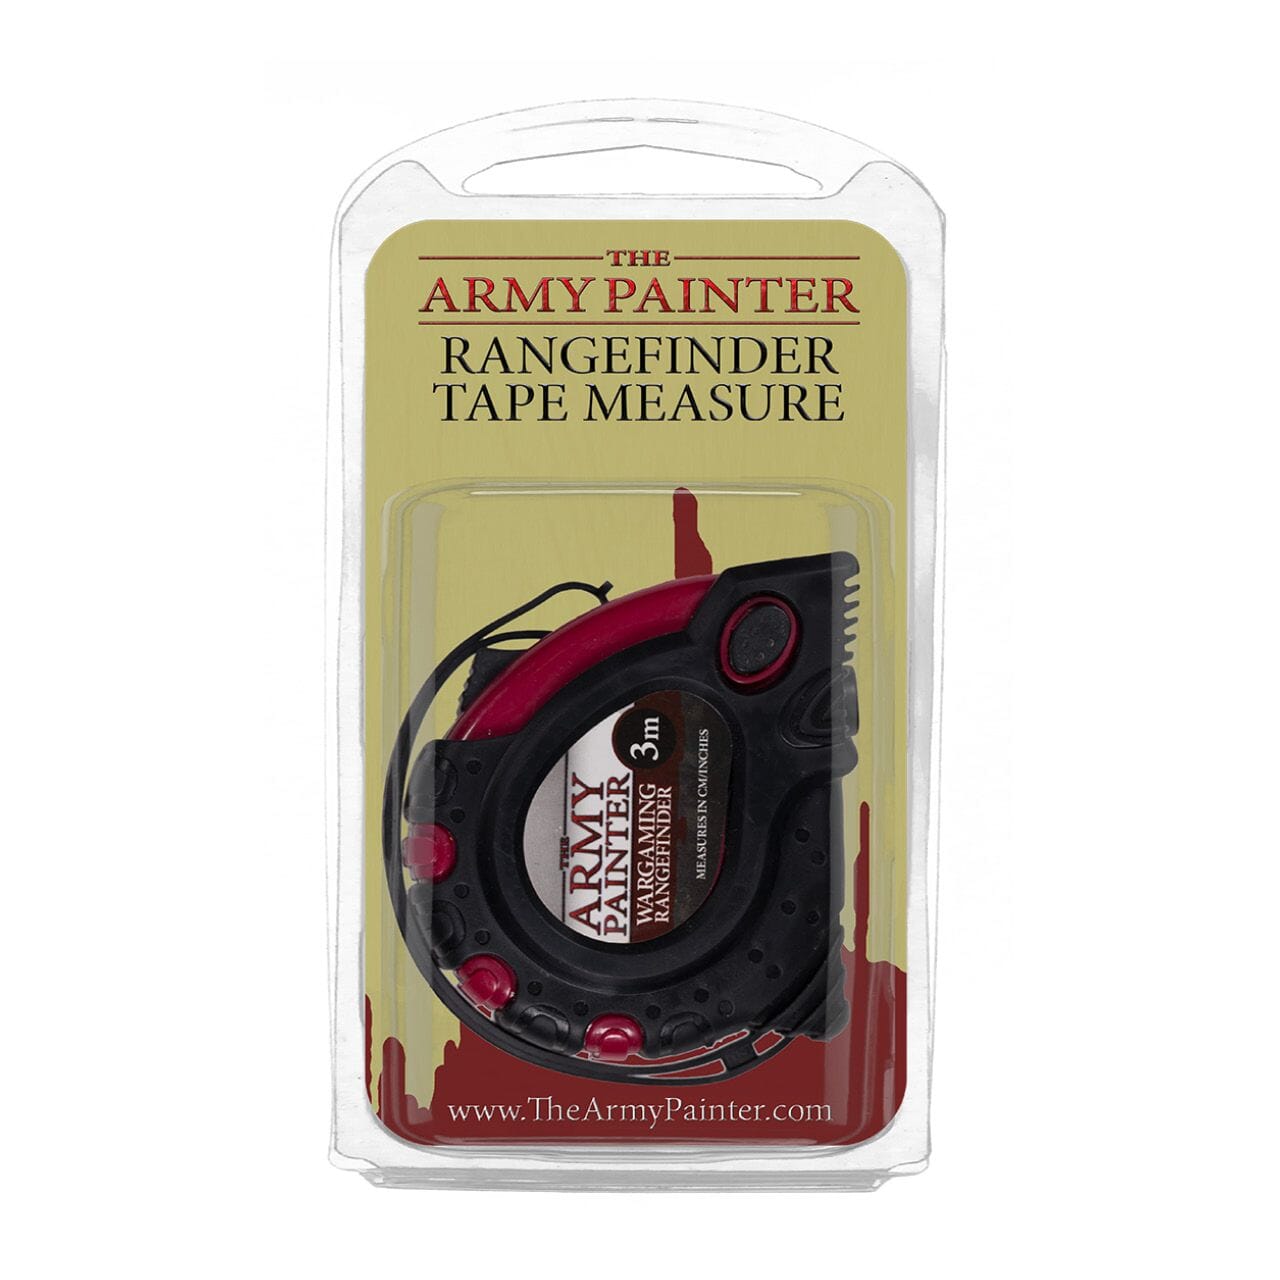 Rangefinder Tape Measure (3m- inches and cm) Supplies The Army Painter 